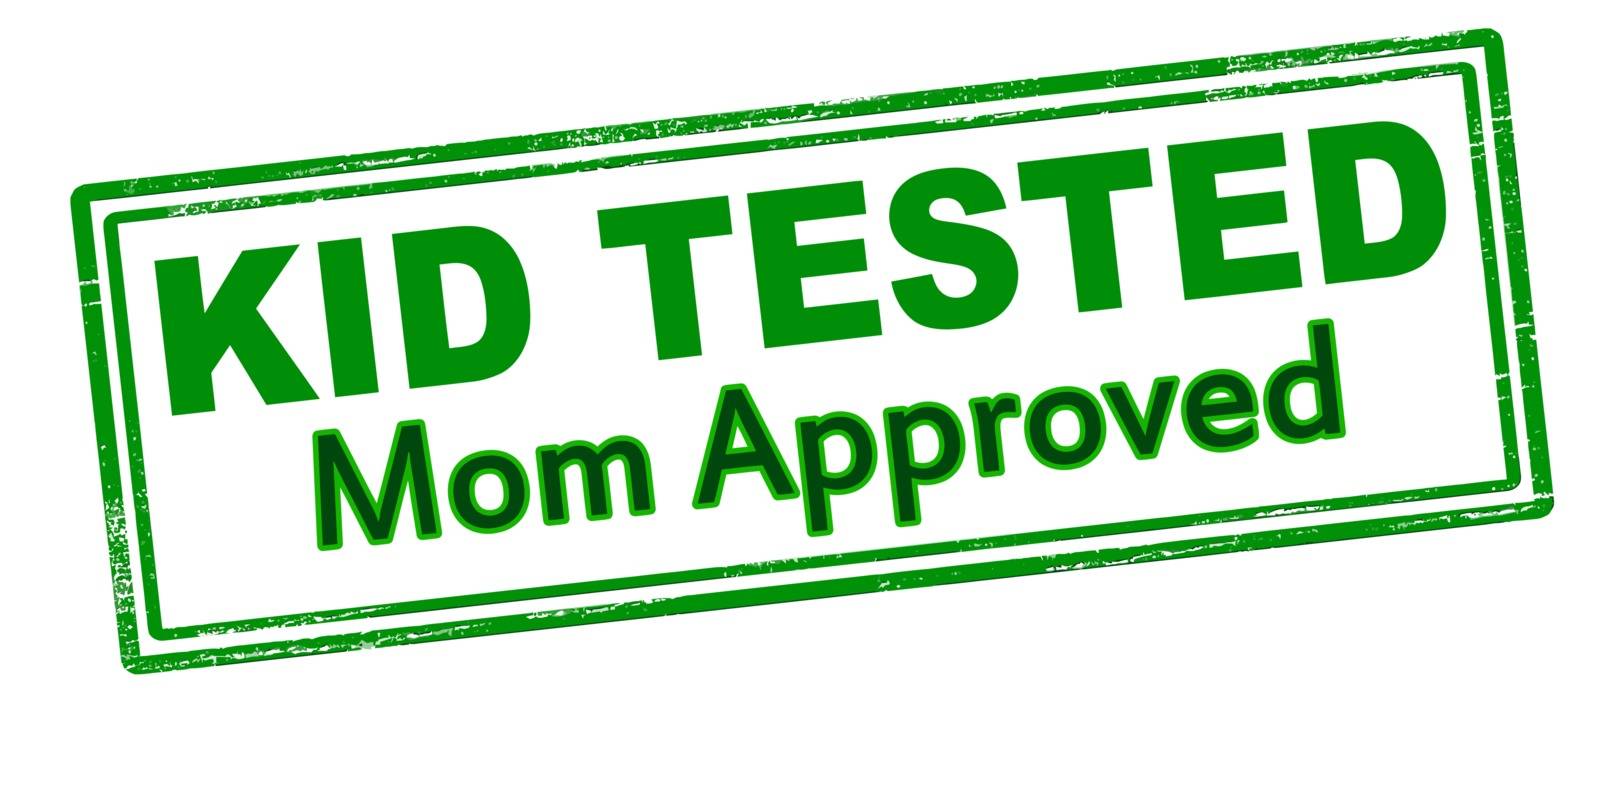 Kid tested mom approved by carmenbobo